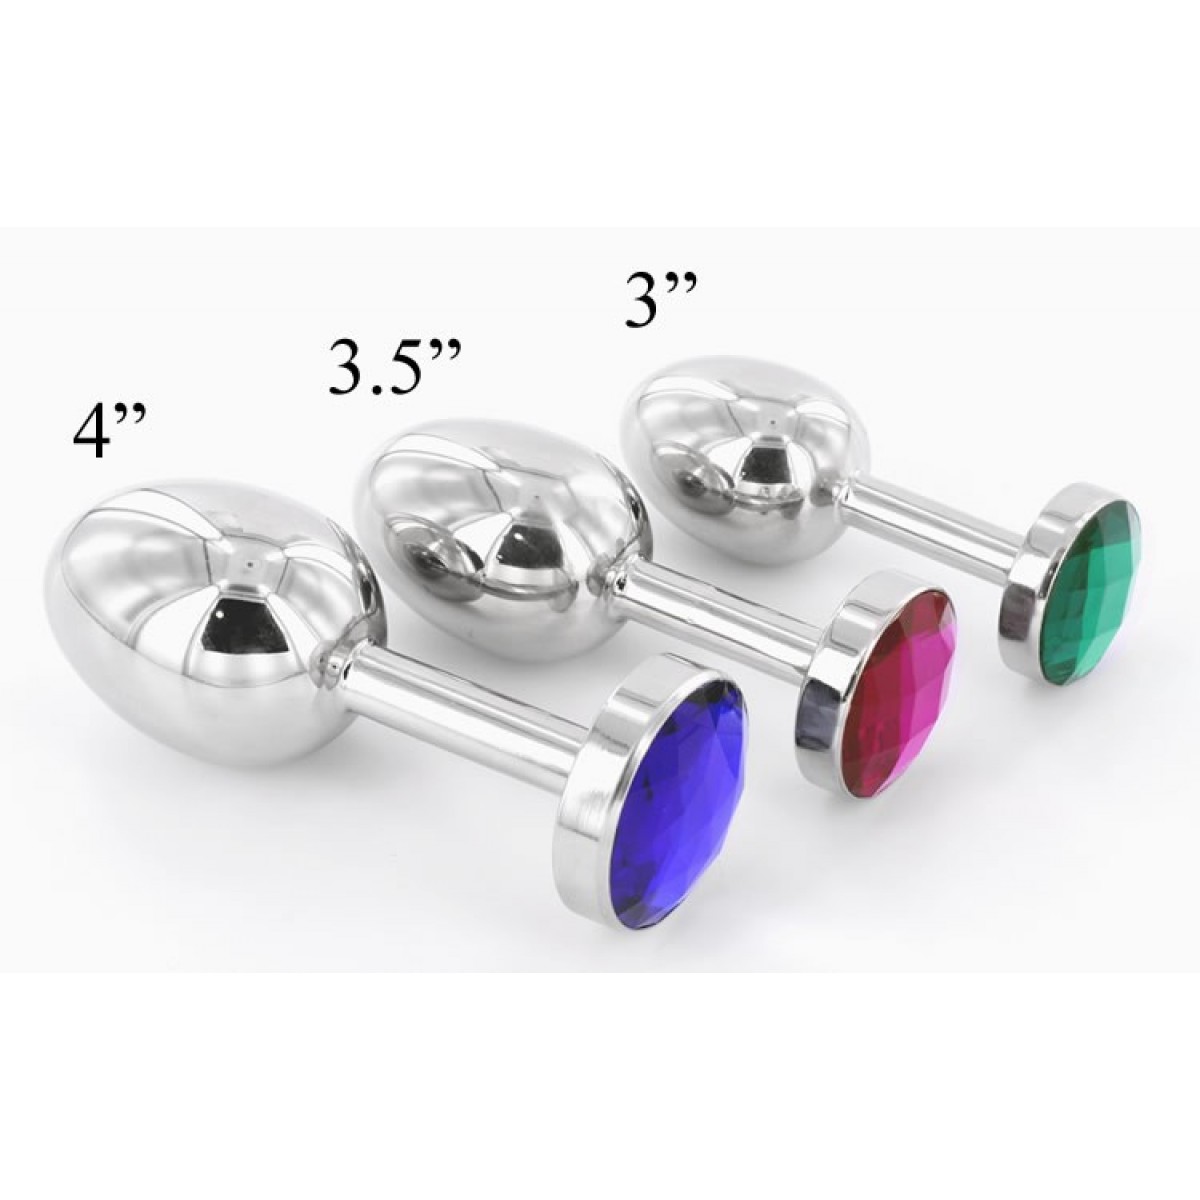 Sex Toys 1hr Delivery 30mm Green Jewel Butt Plug Stainless Steel Adult Store Open Late